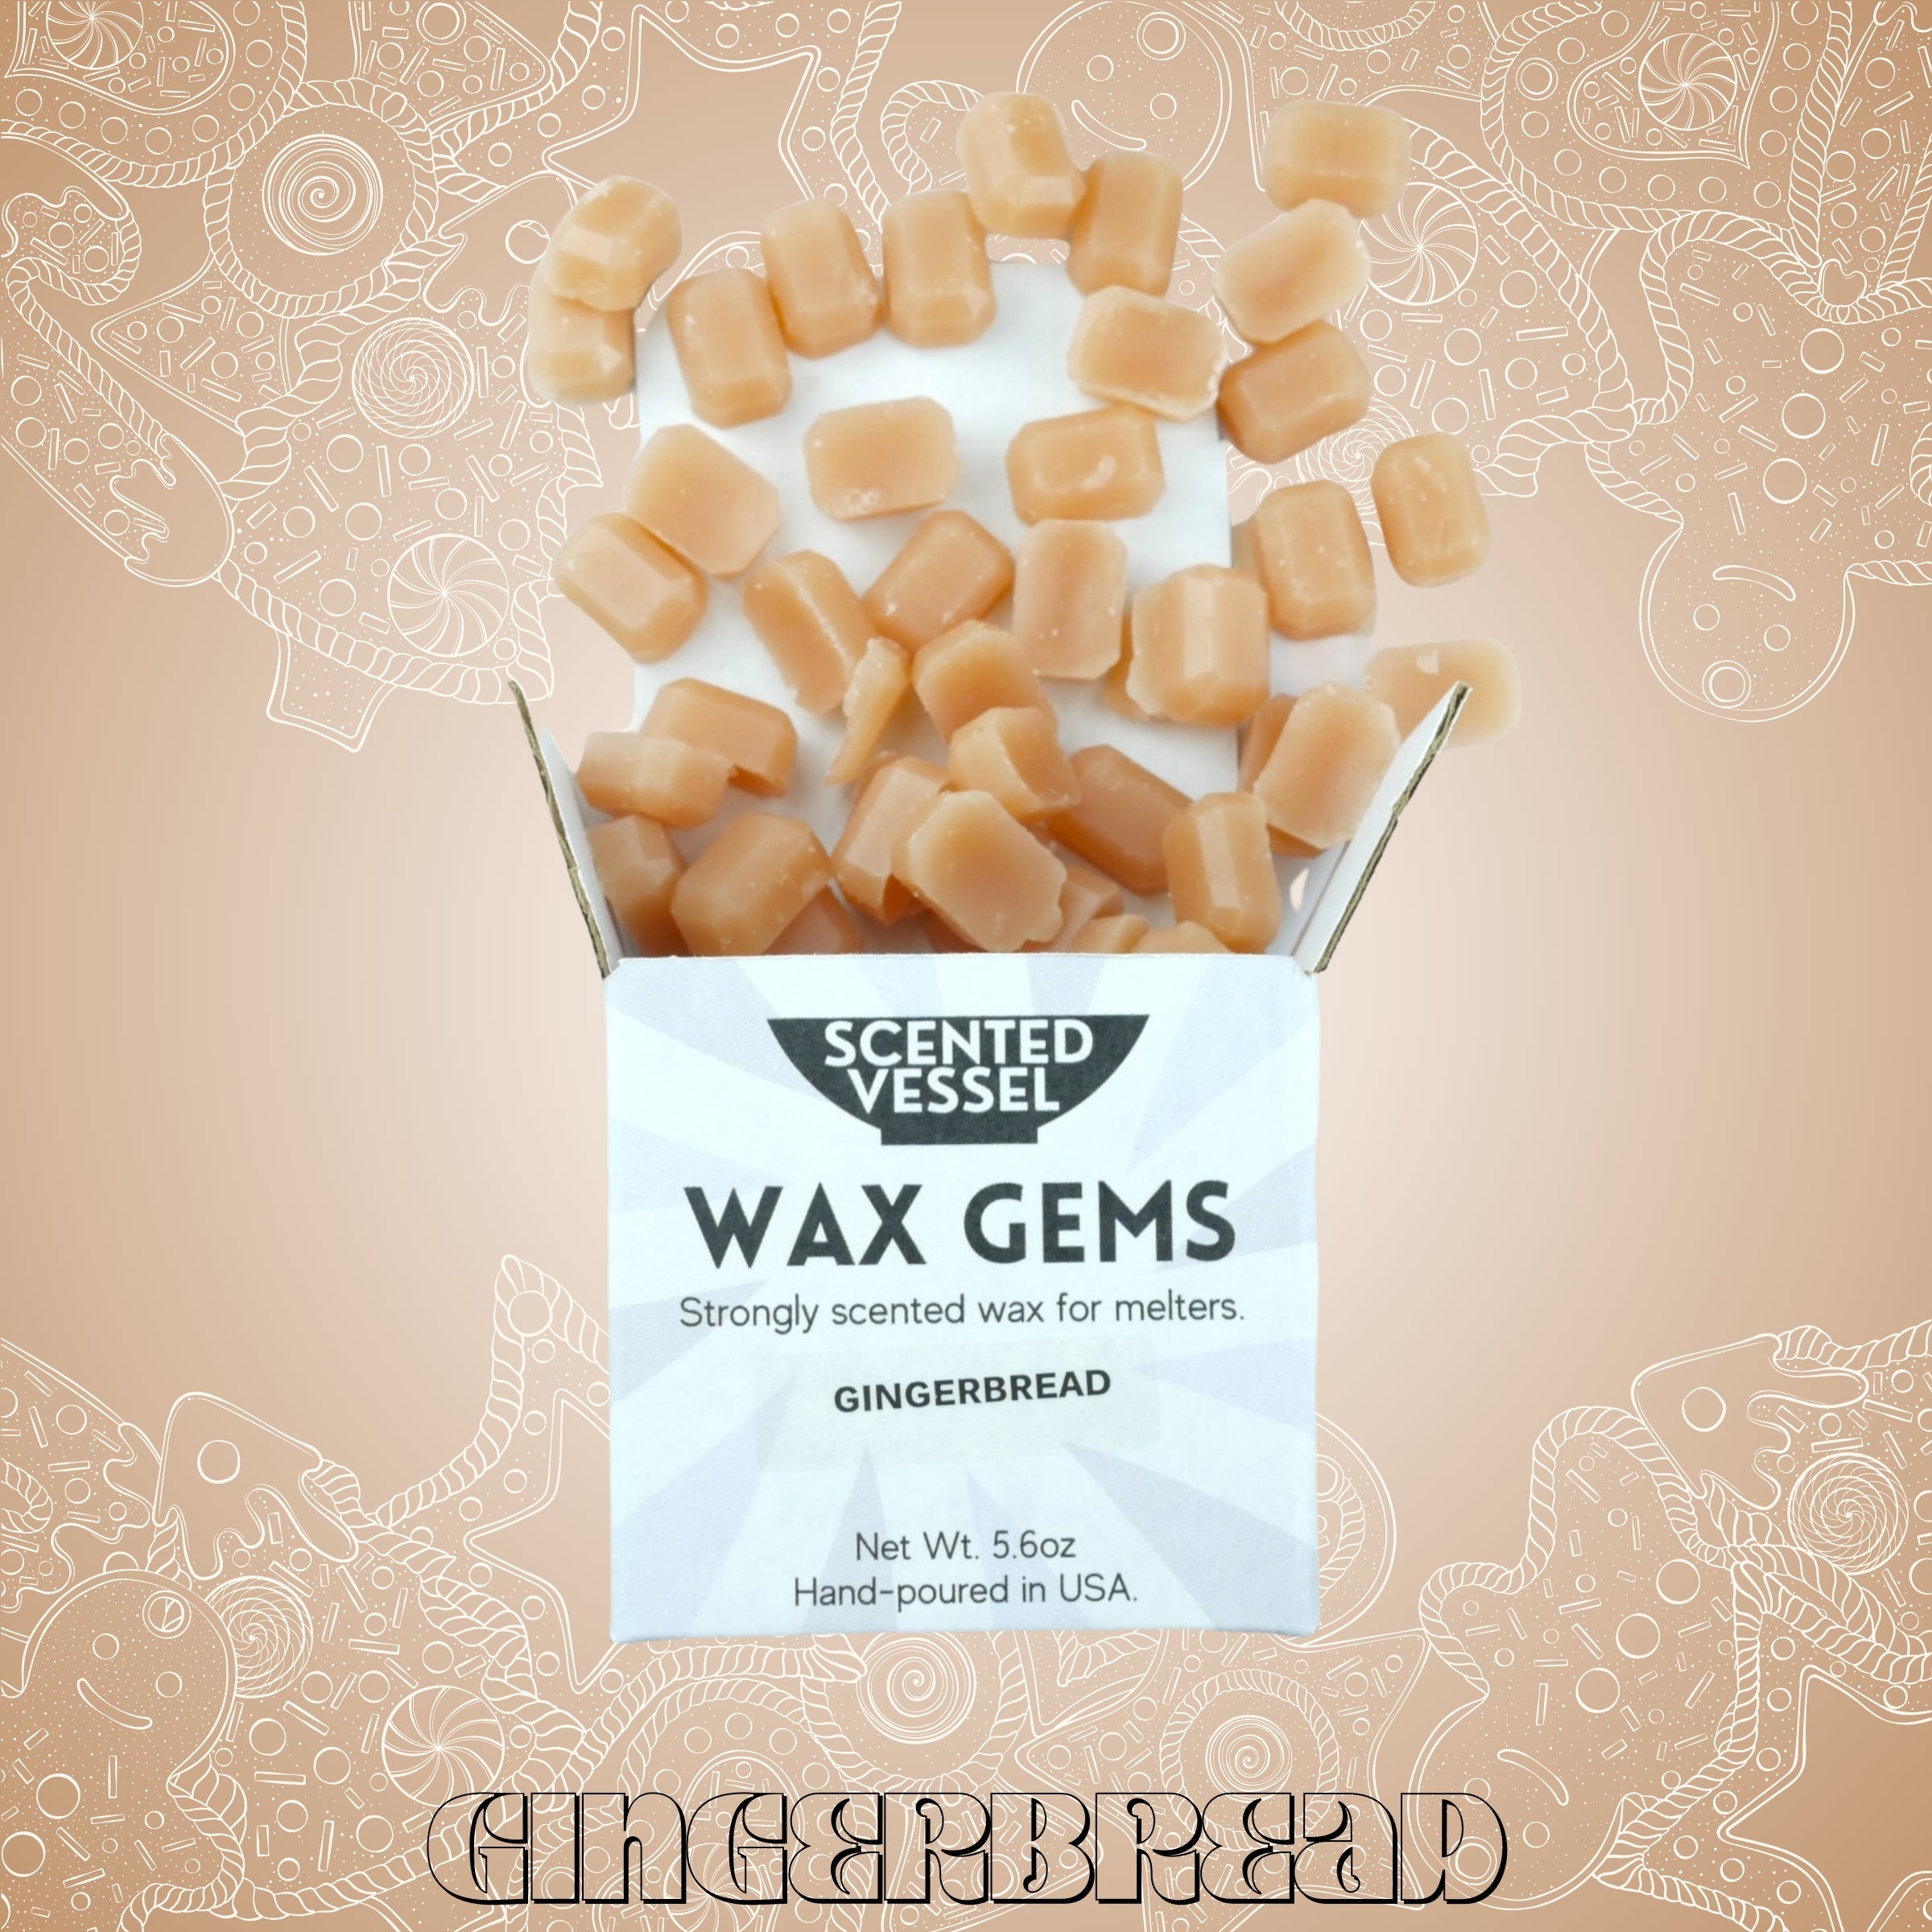 Gingerbread 5.6oz Wax Gems by Scented Vessel